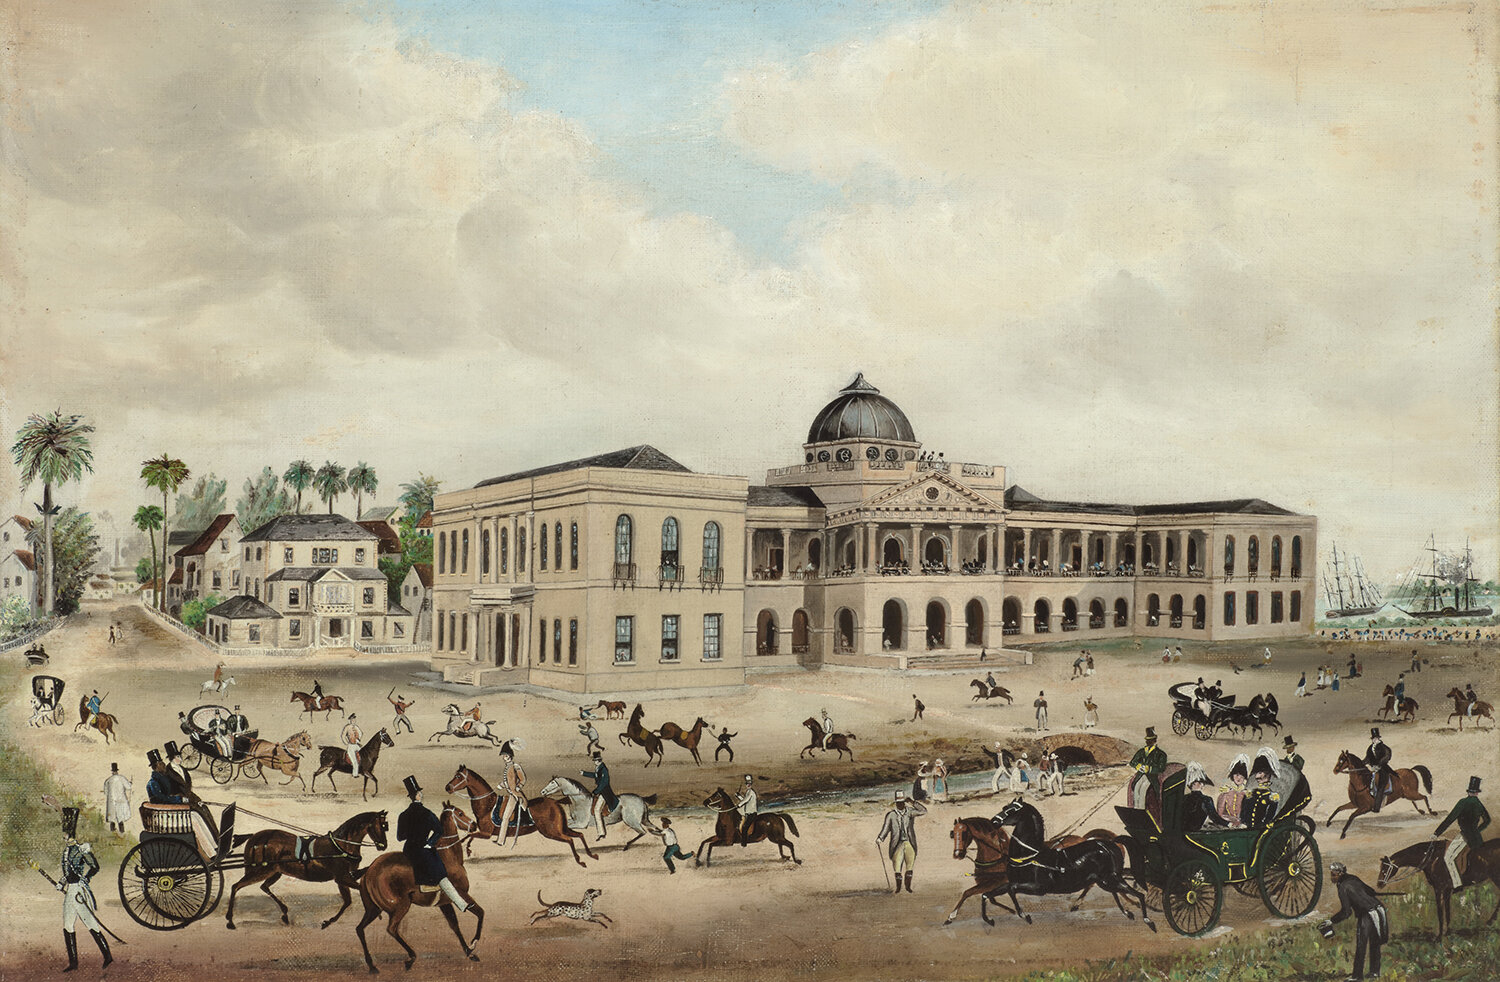 Attributed to W.S. Hedges (British Active 1833-1846) 'Parliament Buildings, Georgetown, British Guyana, Circa 1835'